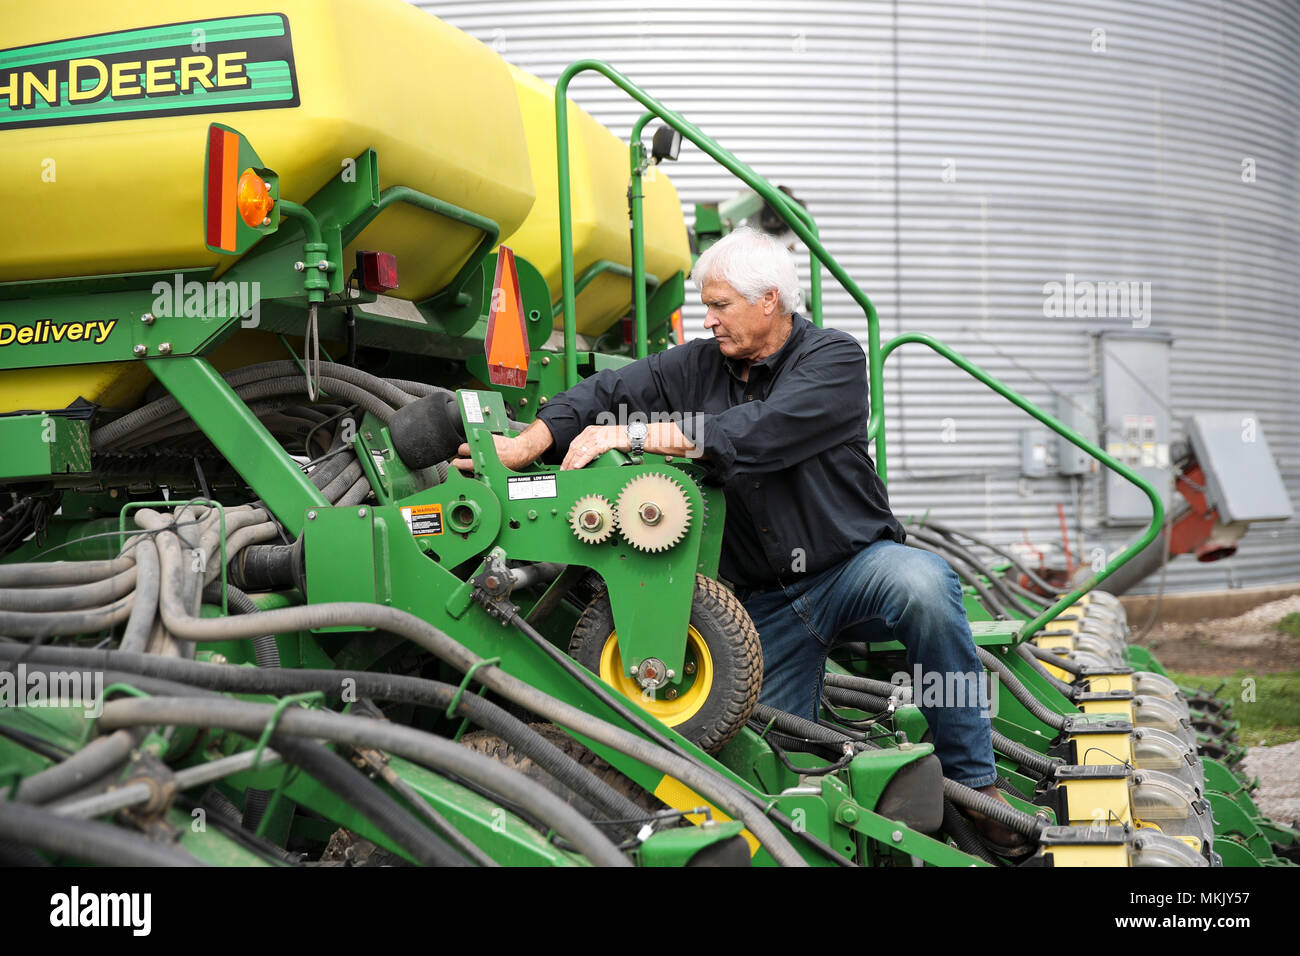 (180509) -- IOWA, May 9, 2018 (Xinhua) -- Rick Kimberley checks a farming combine machine at his farm near Des Moines, capital of Iowa State, May 3, 2018. Rick and his son, Grant, grow more than 4,000 acres of corn and soybeans with a couple of hired hands and massive combines whose computers precisely track yield, moisture and other key statistics for each row and acre. He has been to China 15 times in recent years to talk about precision farming and other tricks of his trade, becoming an ambassador for modern farming methods in China. As for the current trade tensions between the United Stat Stock Photo